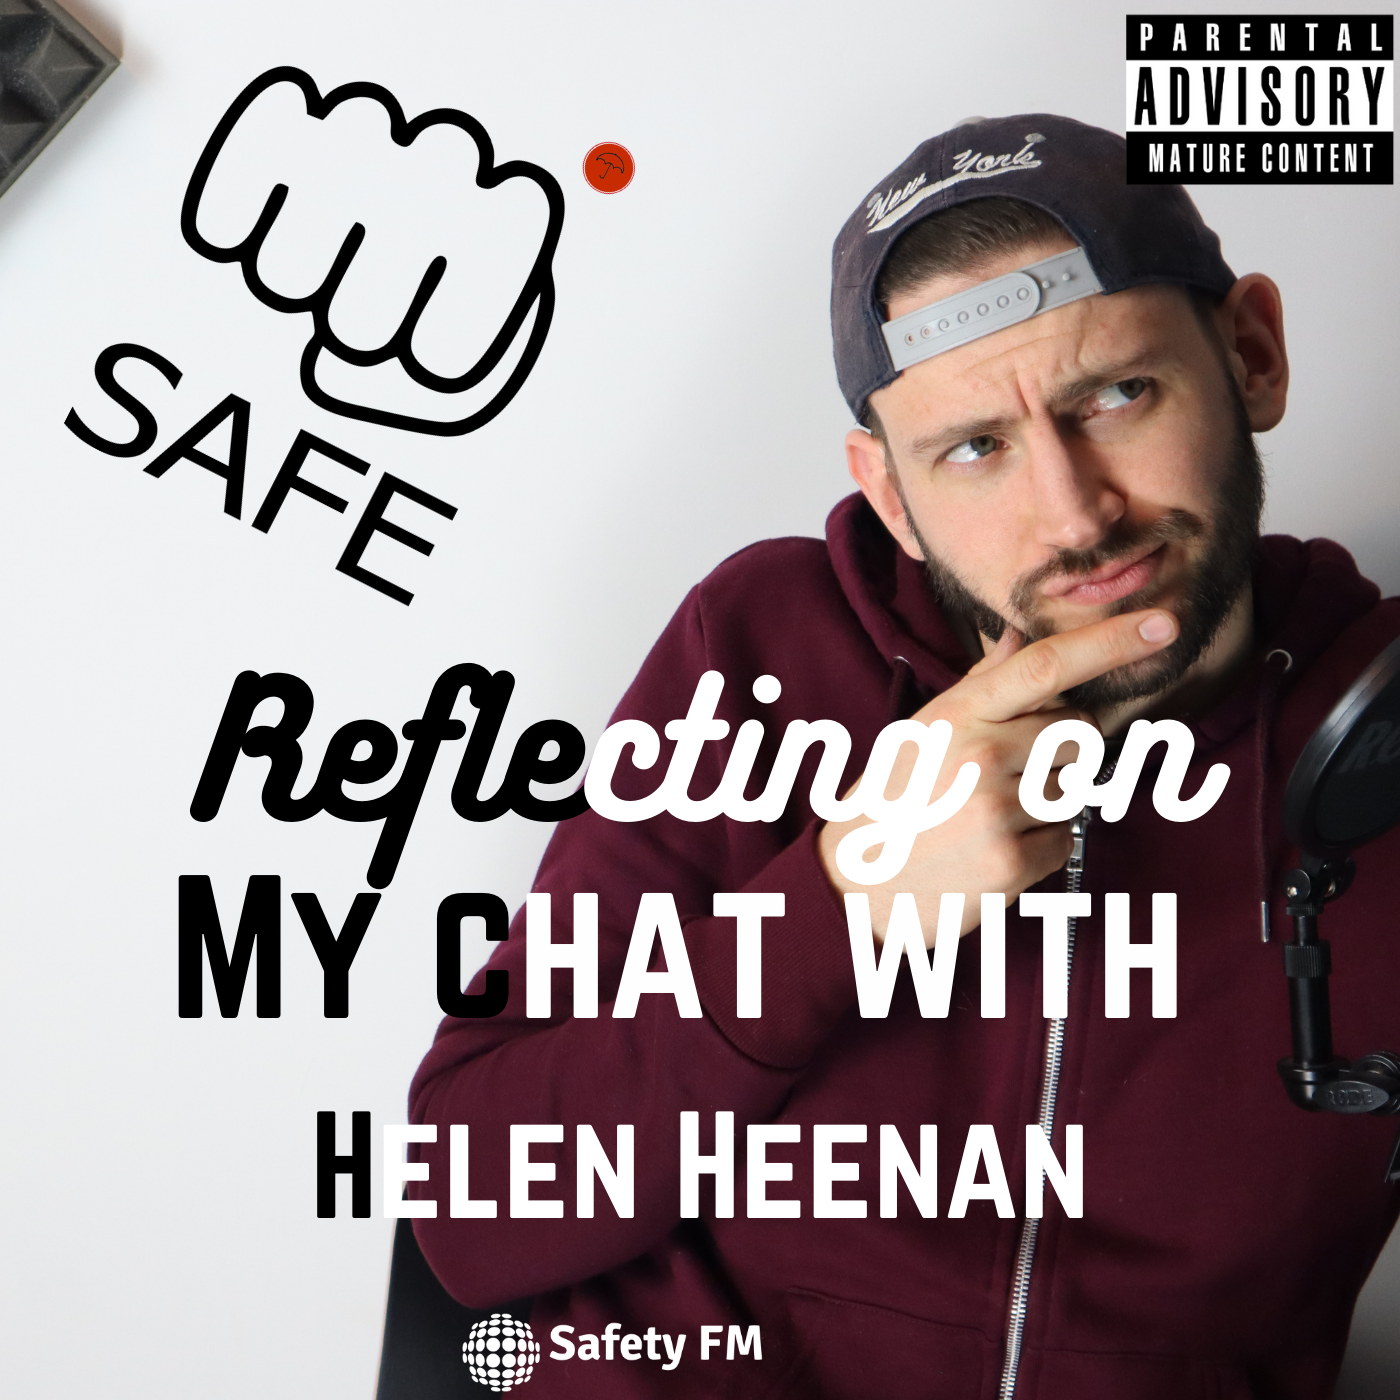 Reflecting on part 2 of my chat with Helen Heenan.